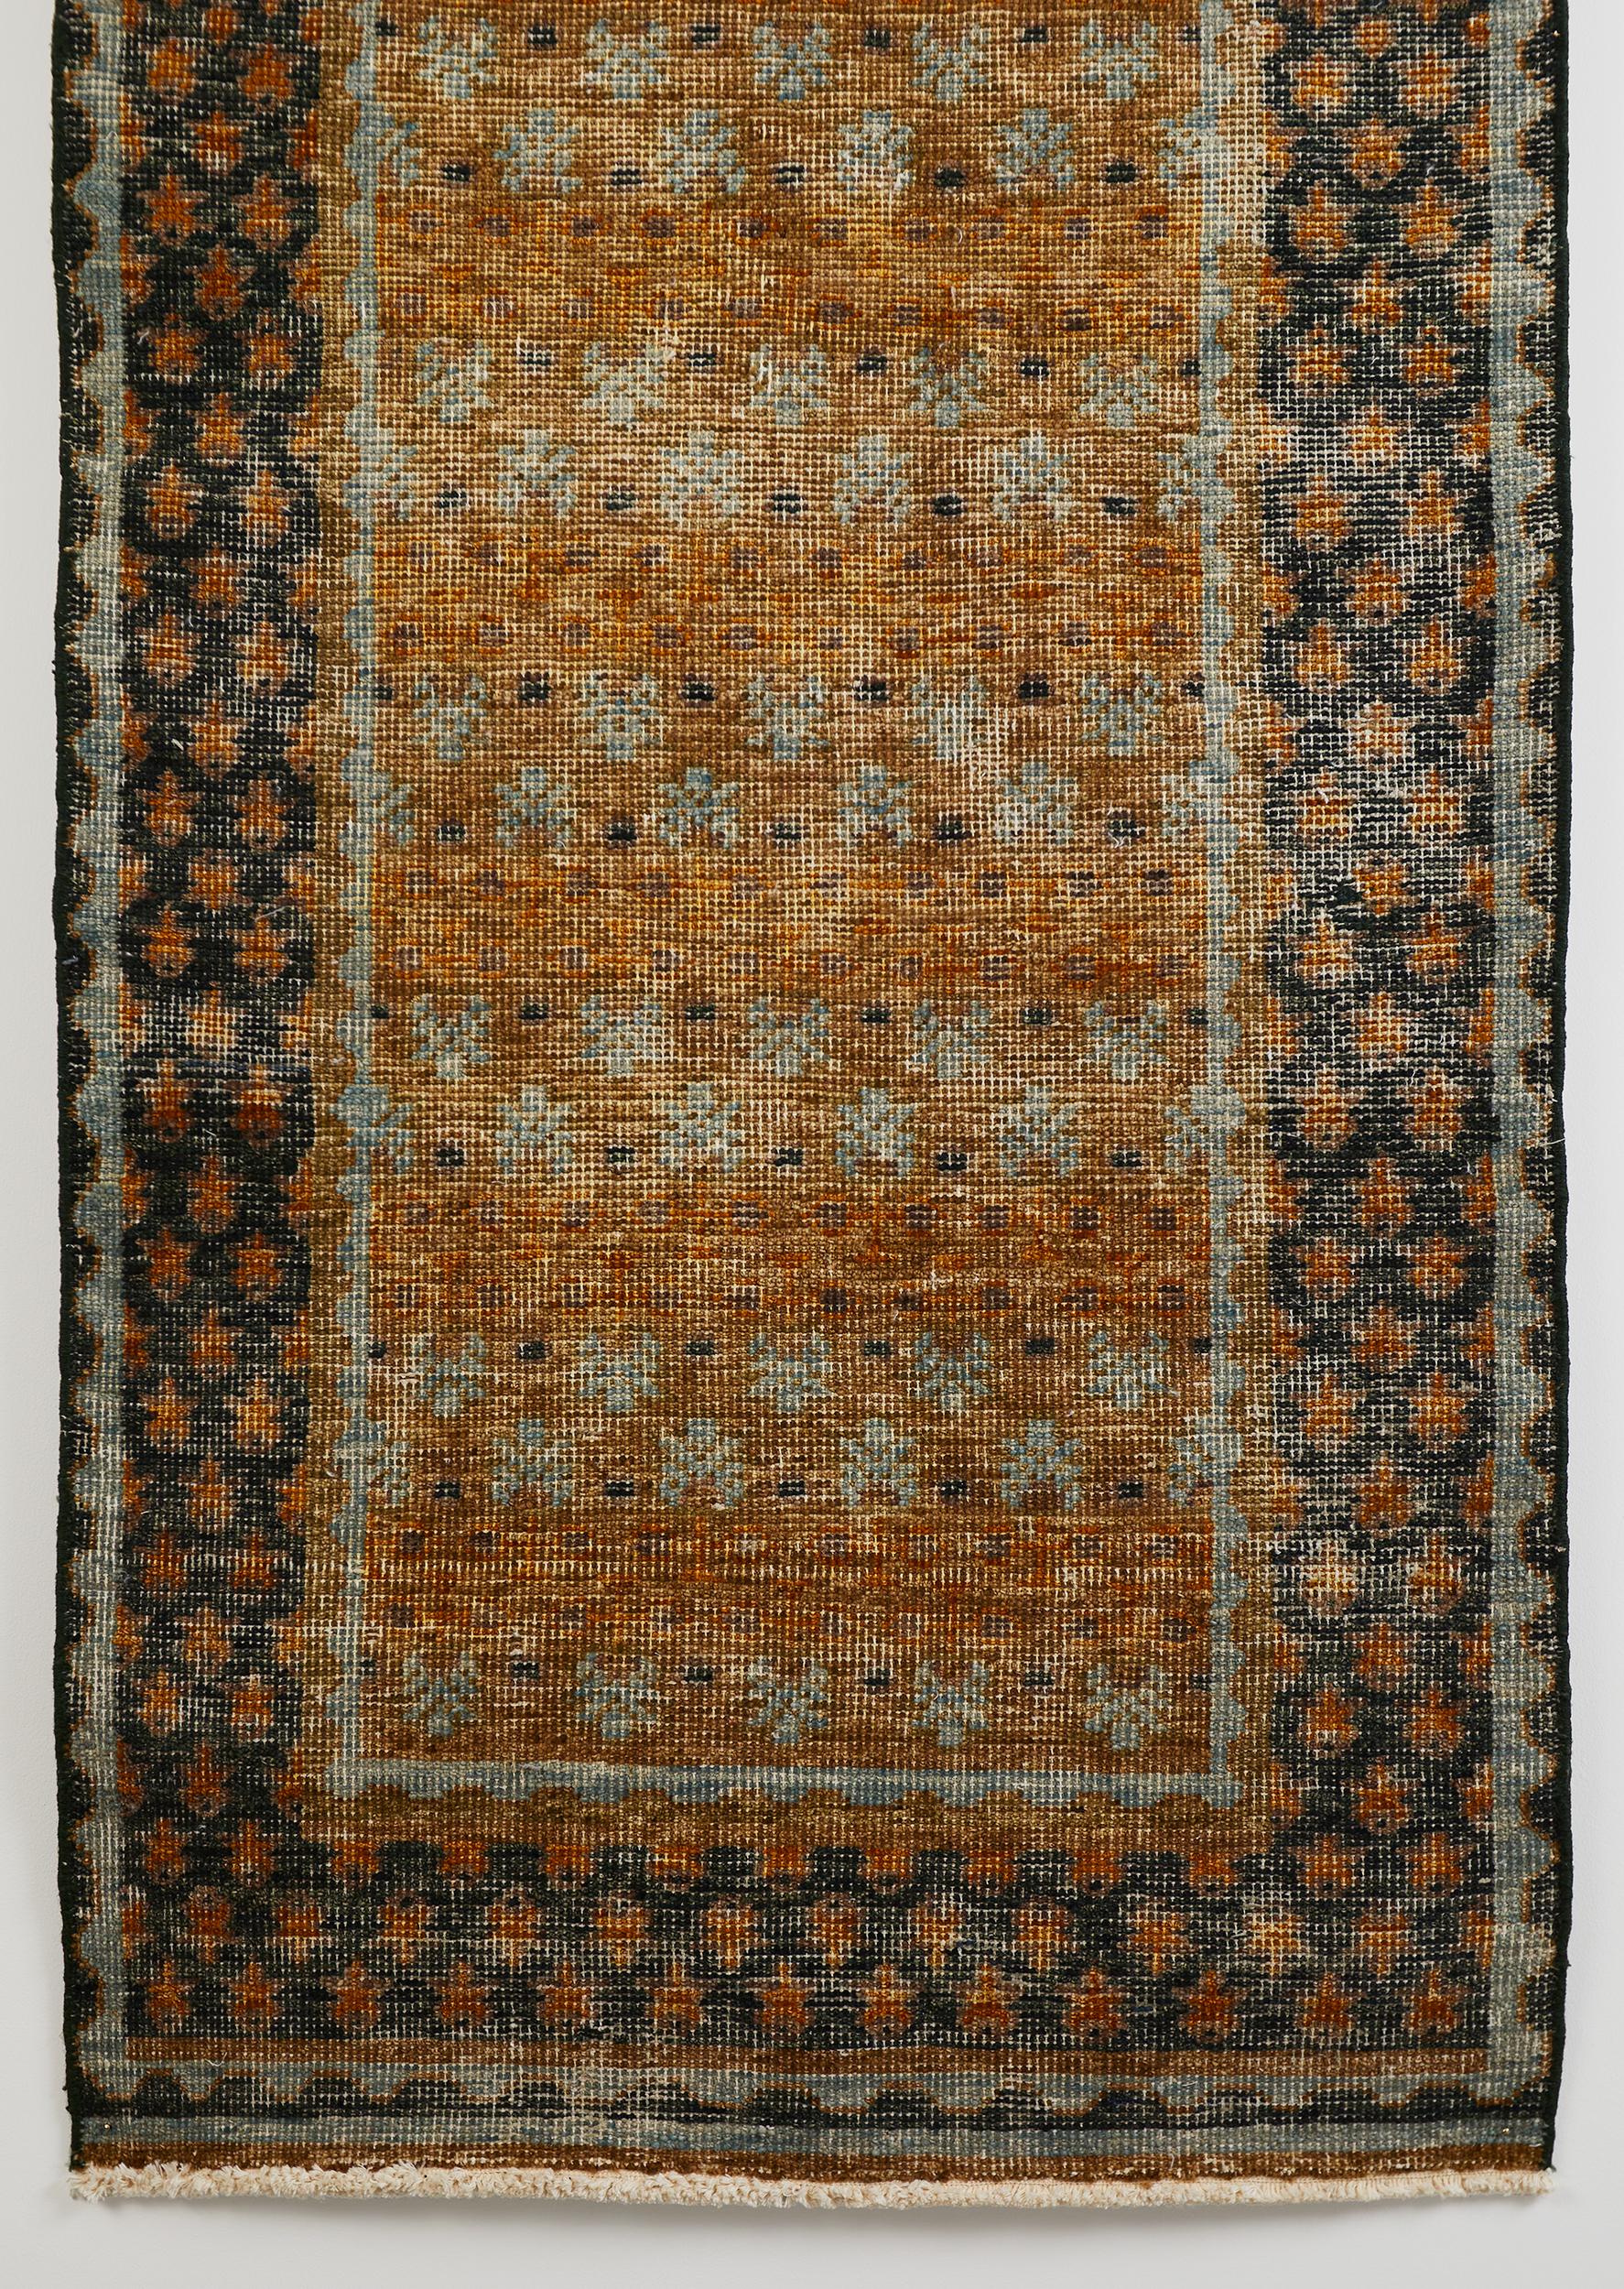 The Forsythia Rug

A hand-knotted, 100% Ghazni Wool rug.

Made in Pakistan.

Forsythia typically mean the first sign of spring, a joyous occasion after a New York winter. While spending countless days in upstate New York for the Wildflower Farms